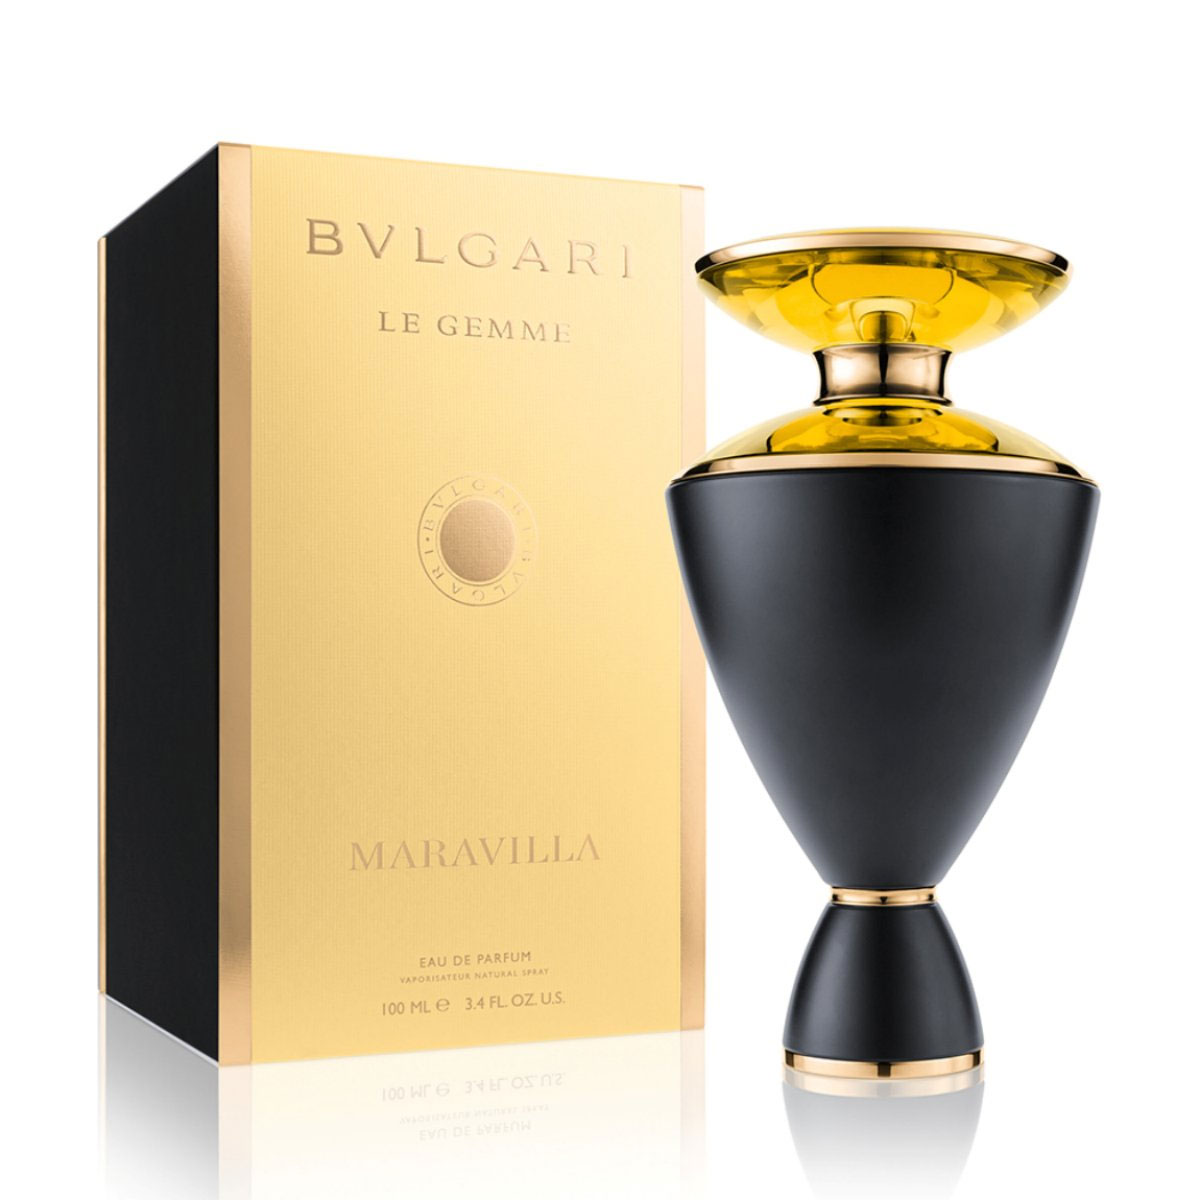 Bvlgari Le Gemme - Perfumes, Colognes, Parfums, Scents resource guide